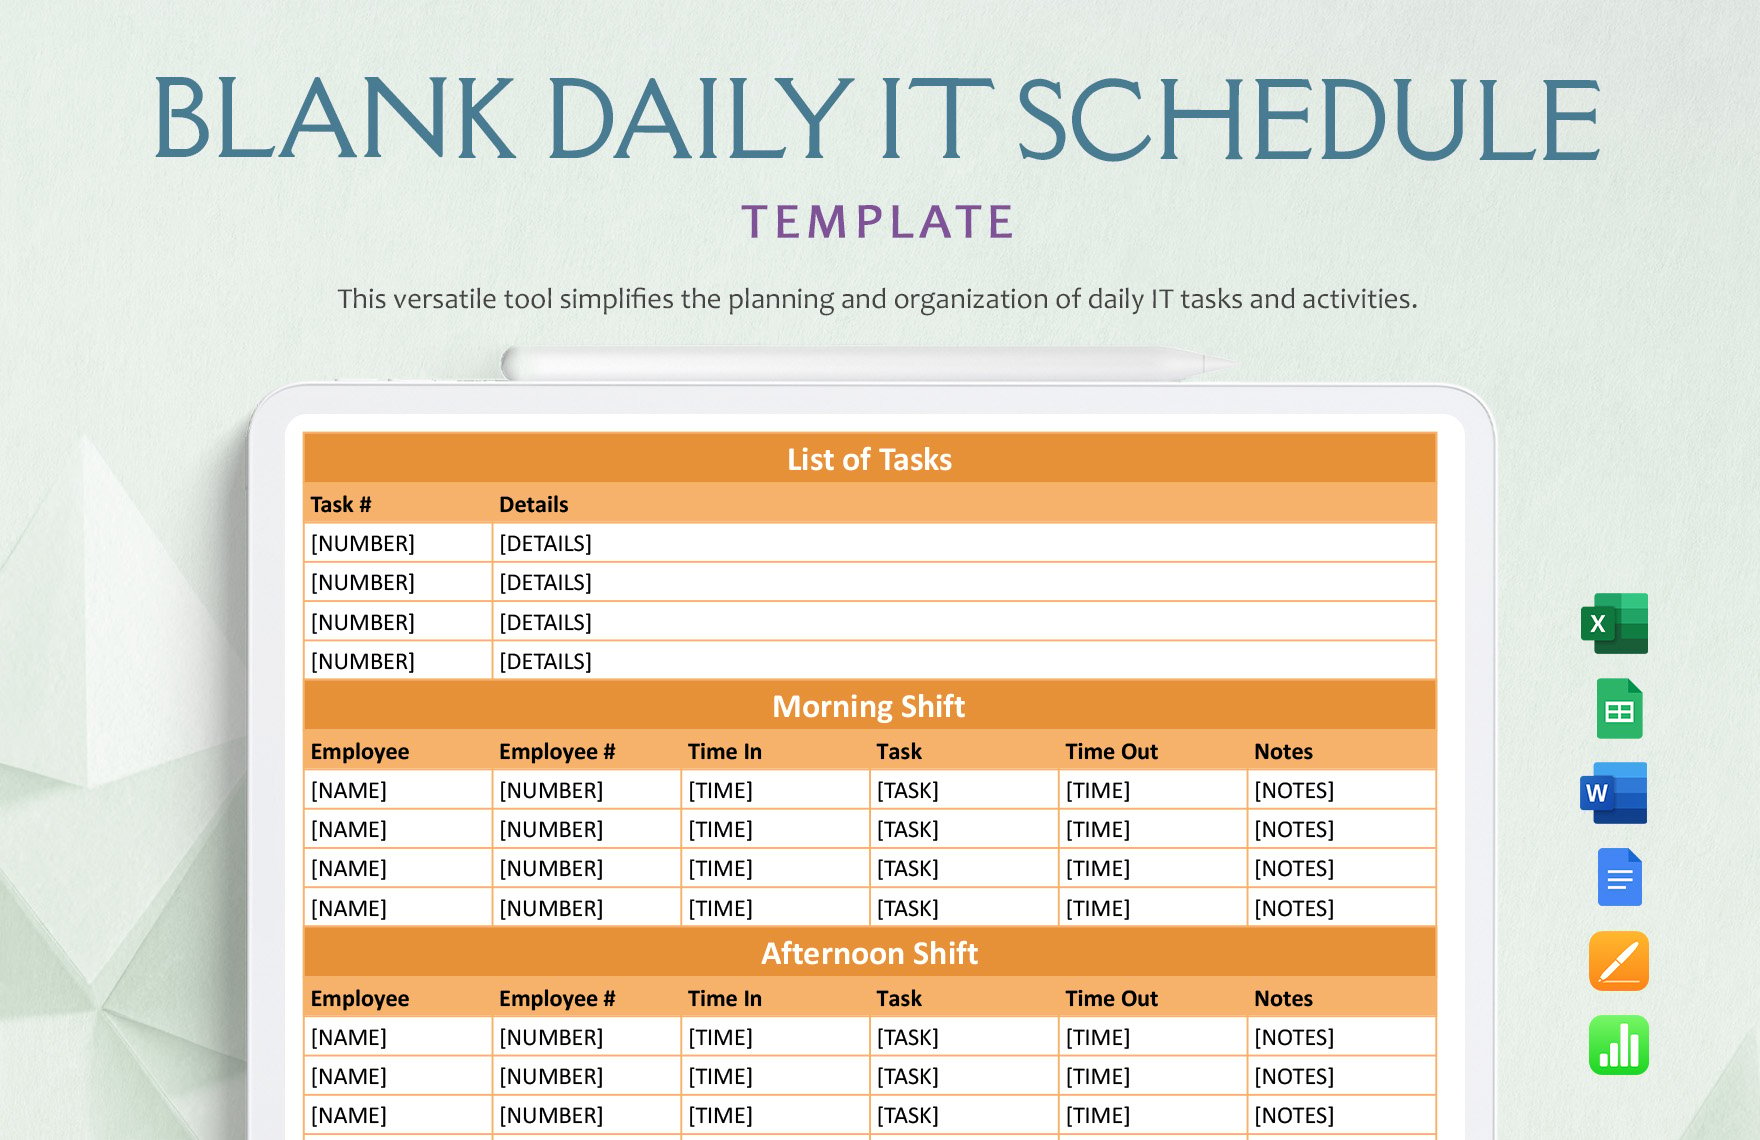 Free Blank Daily IT Schedule Template in Word, Google Docs, Excel, Google Sheets, Apple Pages, Apple Numbers